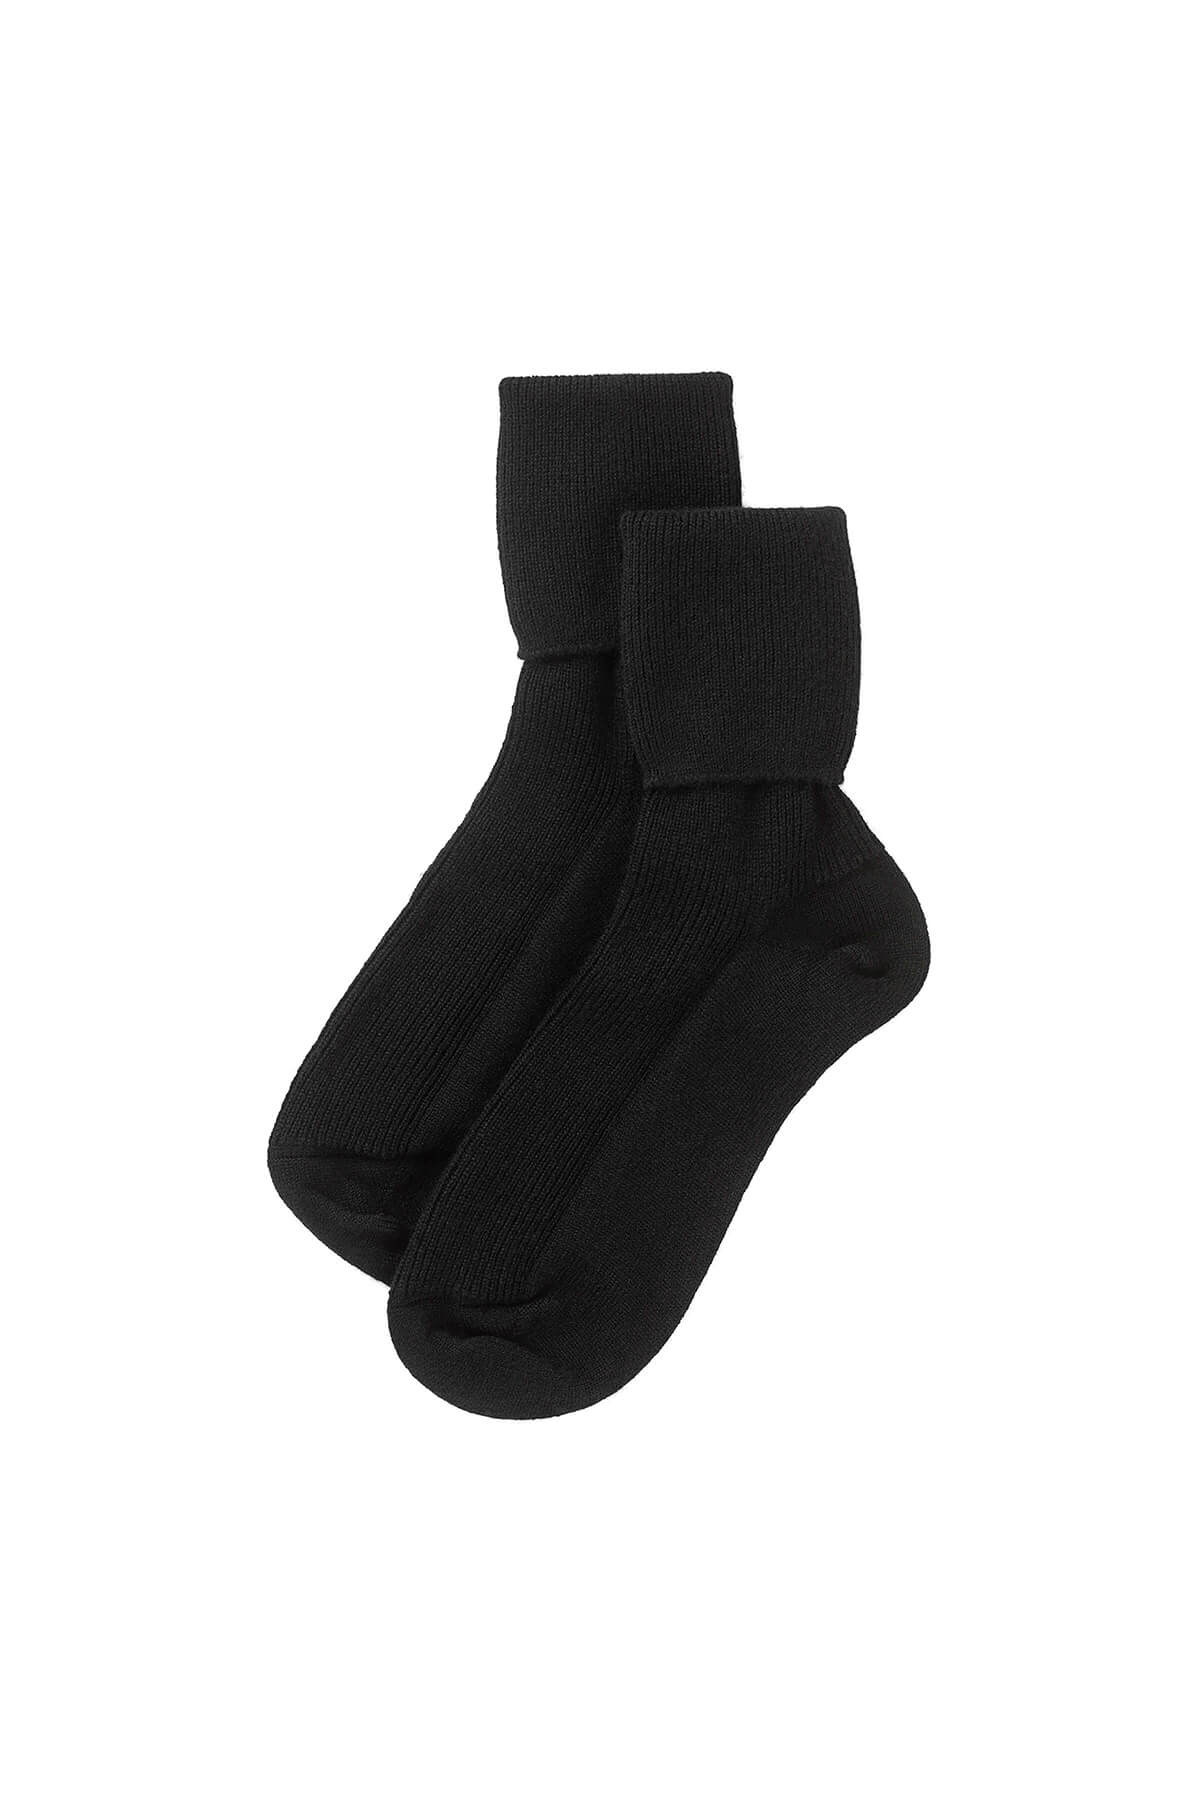 Johnstons of Elgin Gift Set includes 3 pairs of Women's Cashmere Socks in Black on a white background 365GIFTSET1A